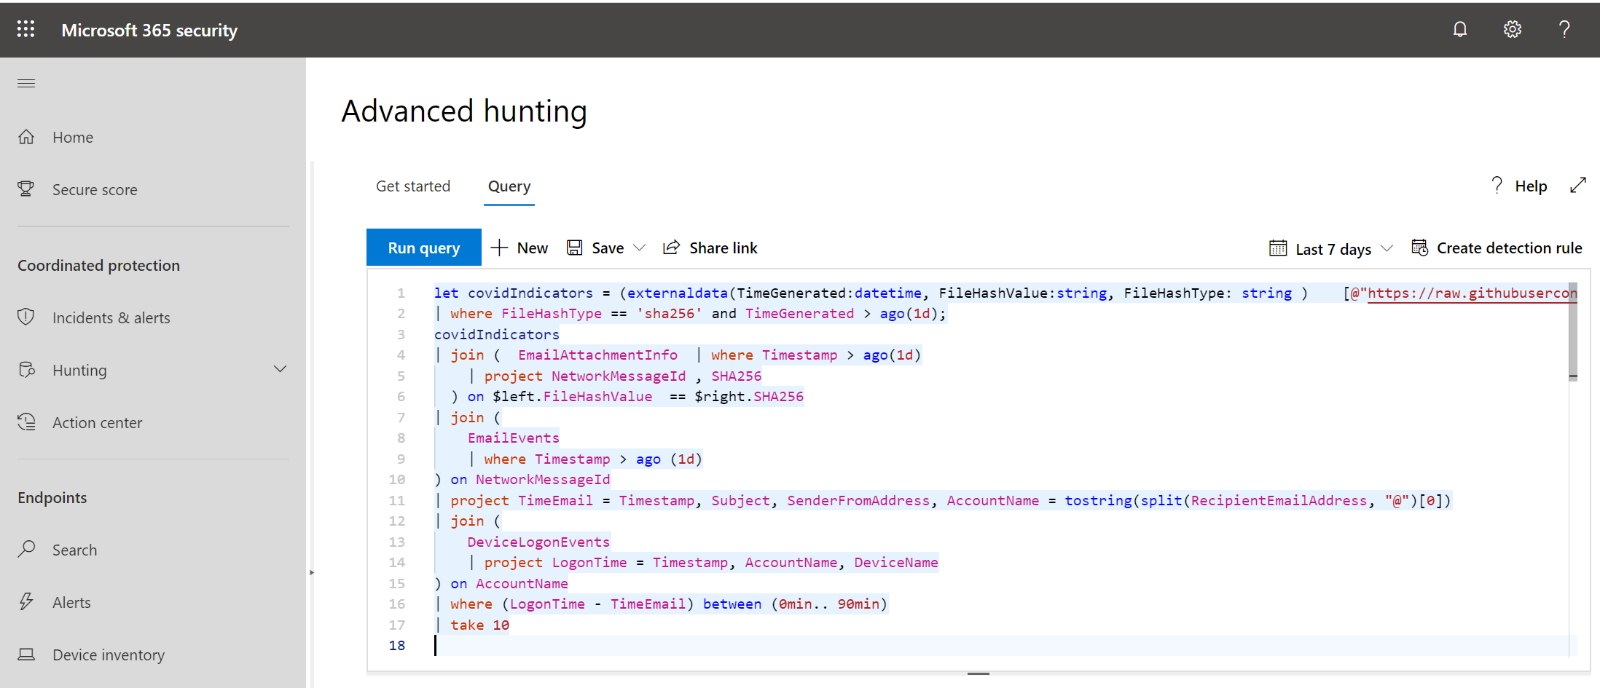 Advanced hunting in Microsoft 365 security.